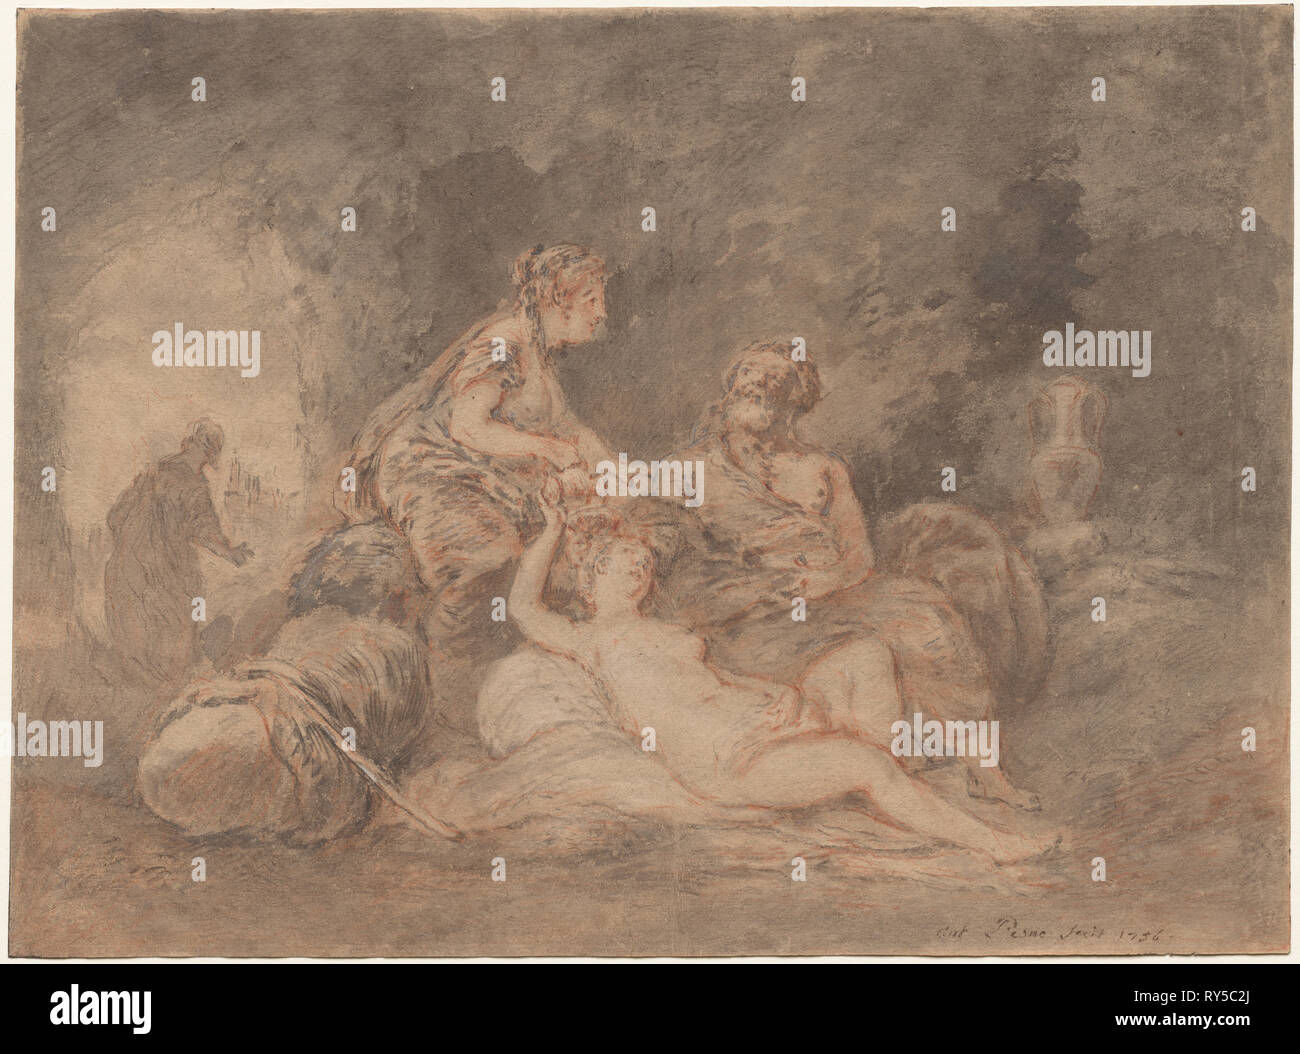 Lot and His Daughters, 1756. Antoine Pesne (French, 1683-1757). Black and red chalk wash, gray wash, heightened with white gouache; framing lines in black ink; sheet: 33.4 x 45.1 cm (13 1/8 x 17 3/4 in Stock Photo